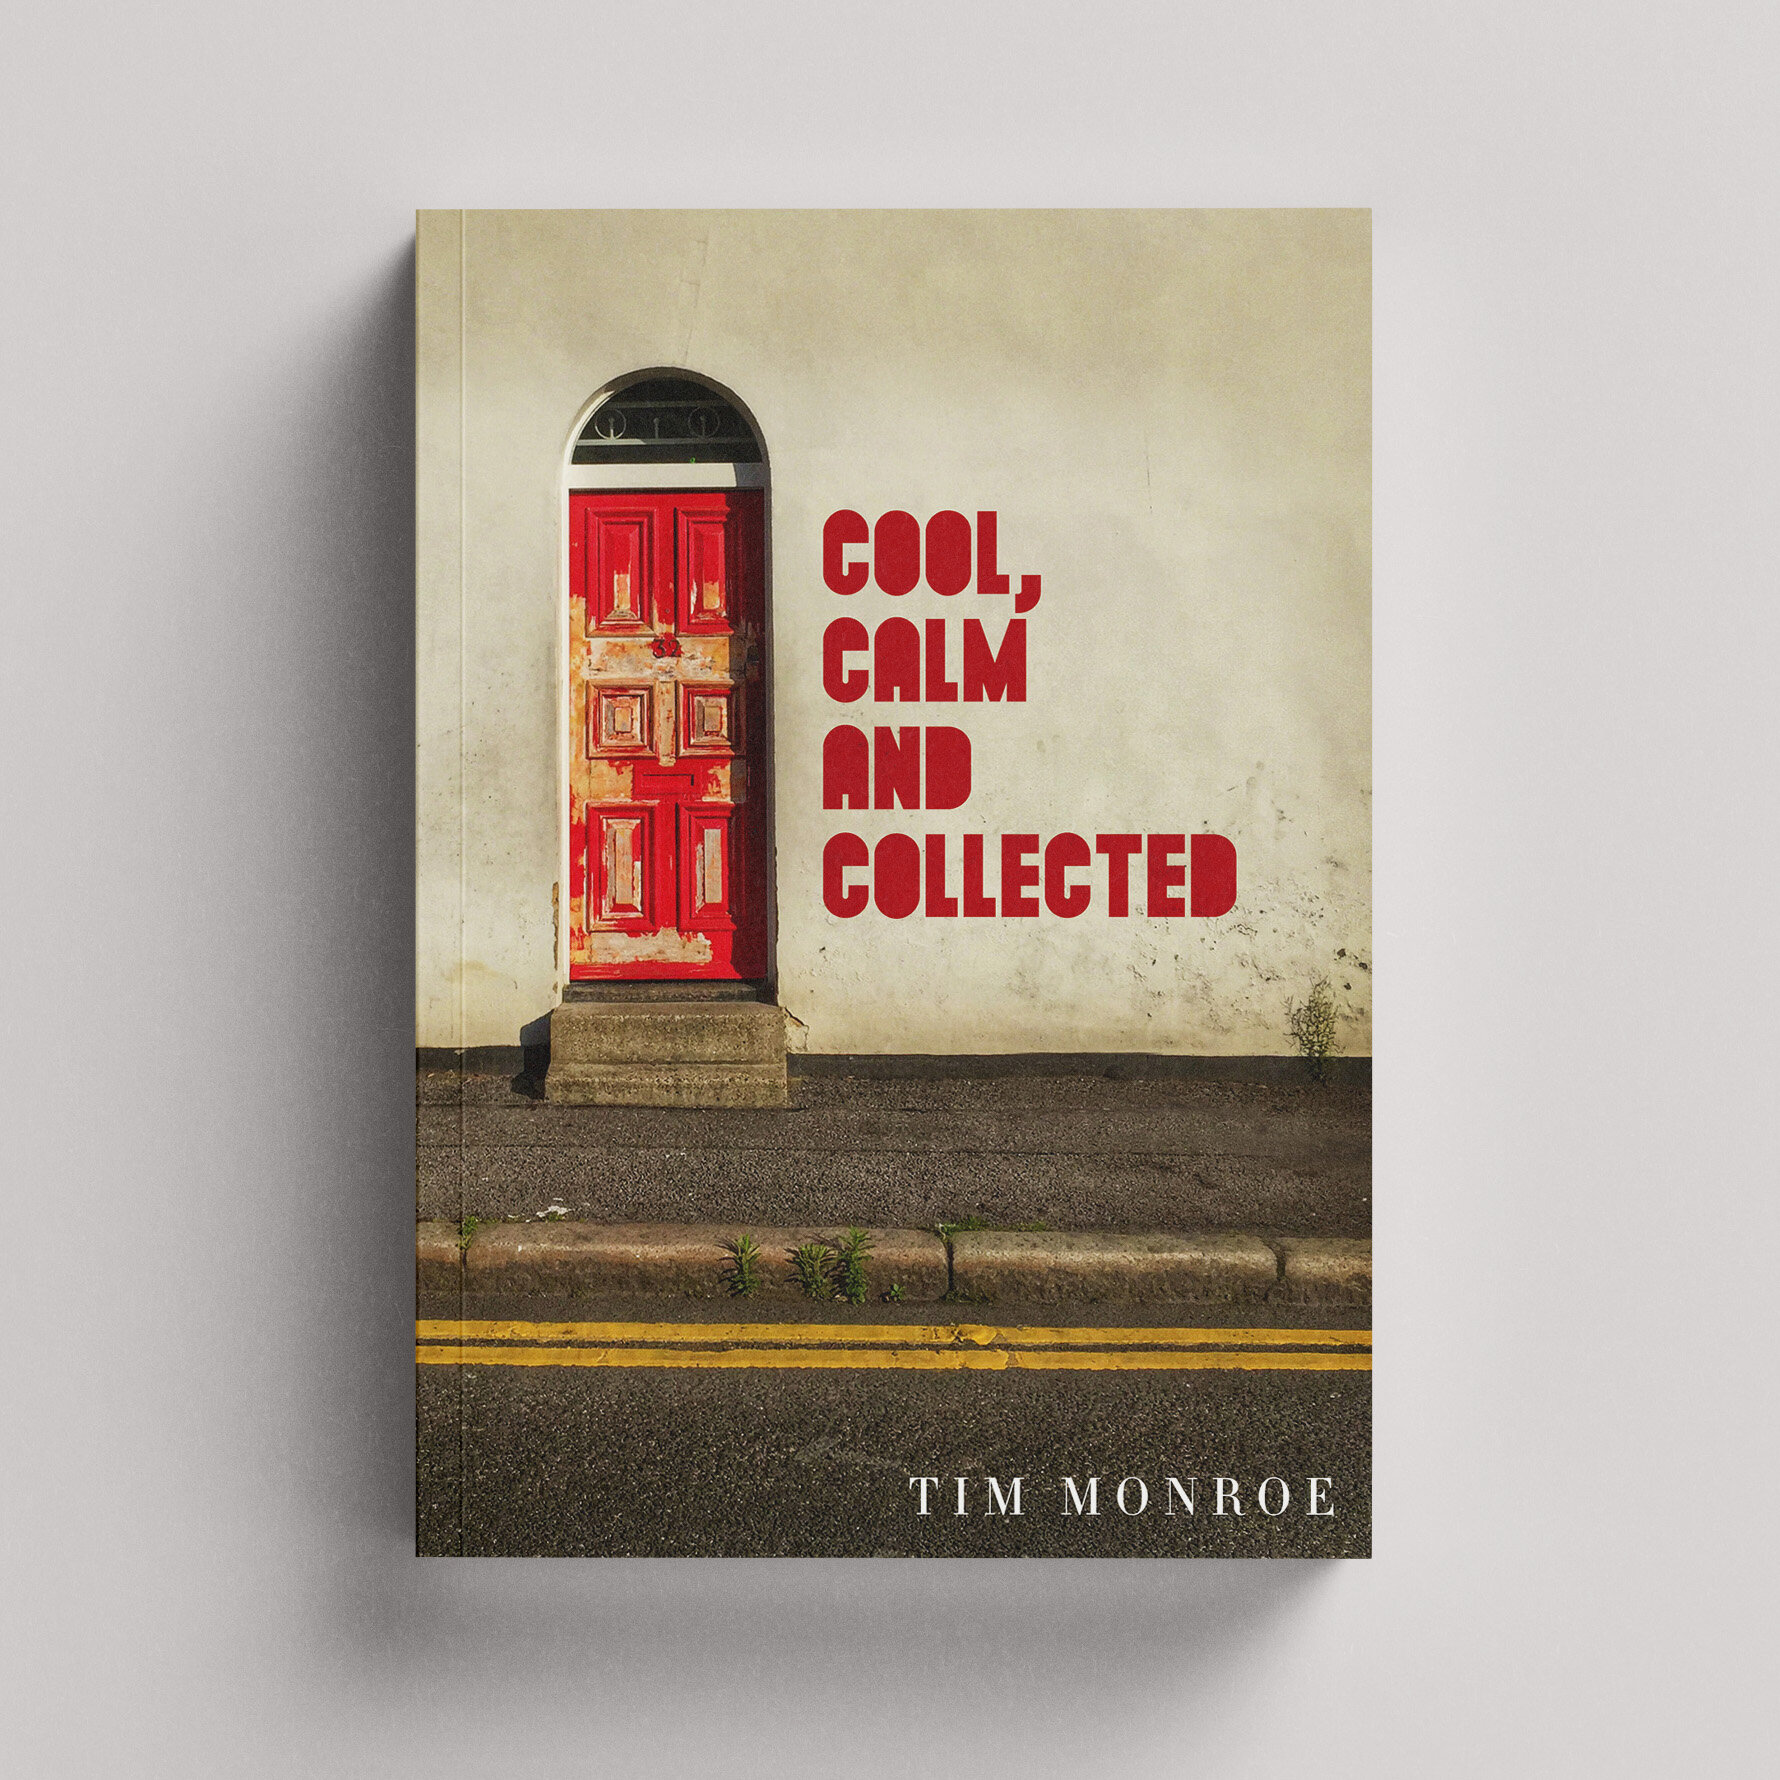 Cool, calm and collected book cover